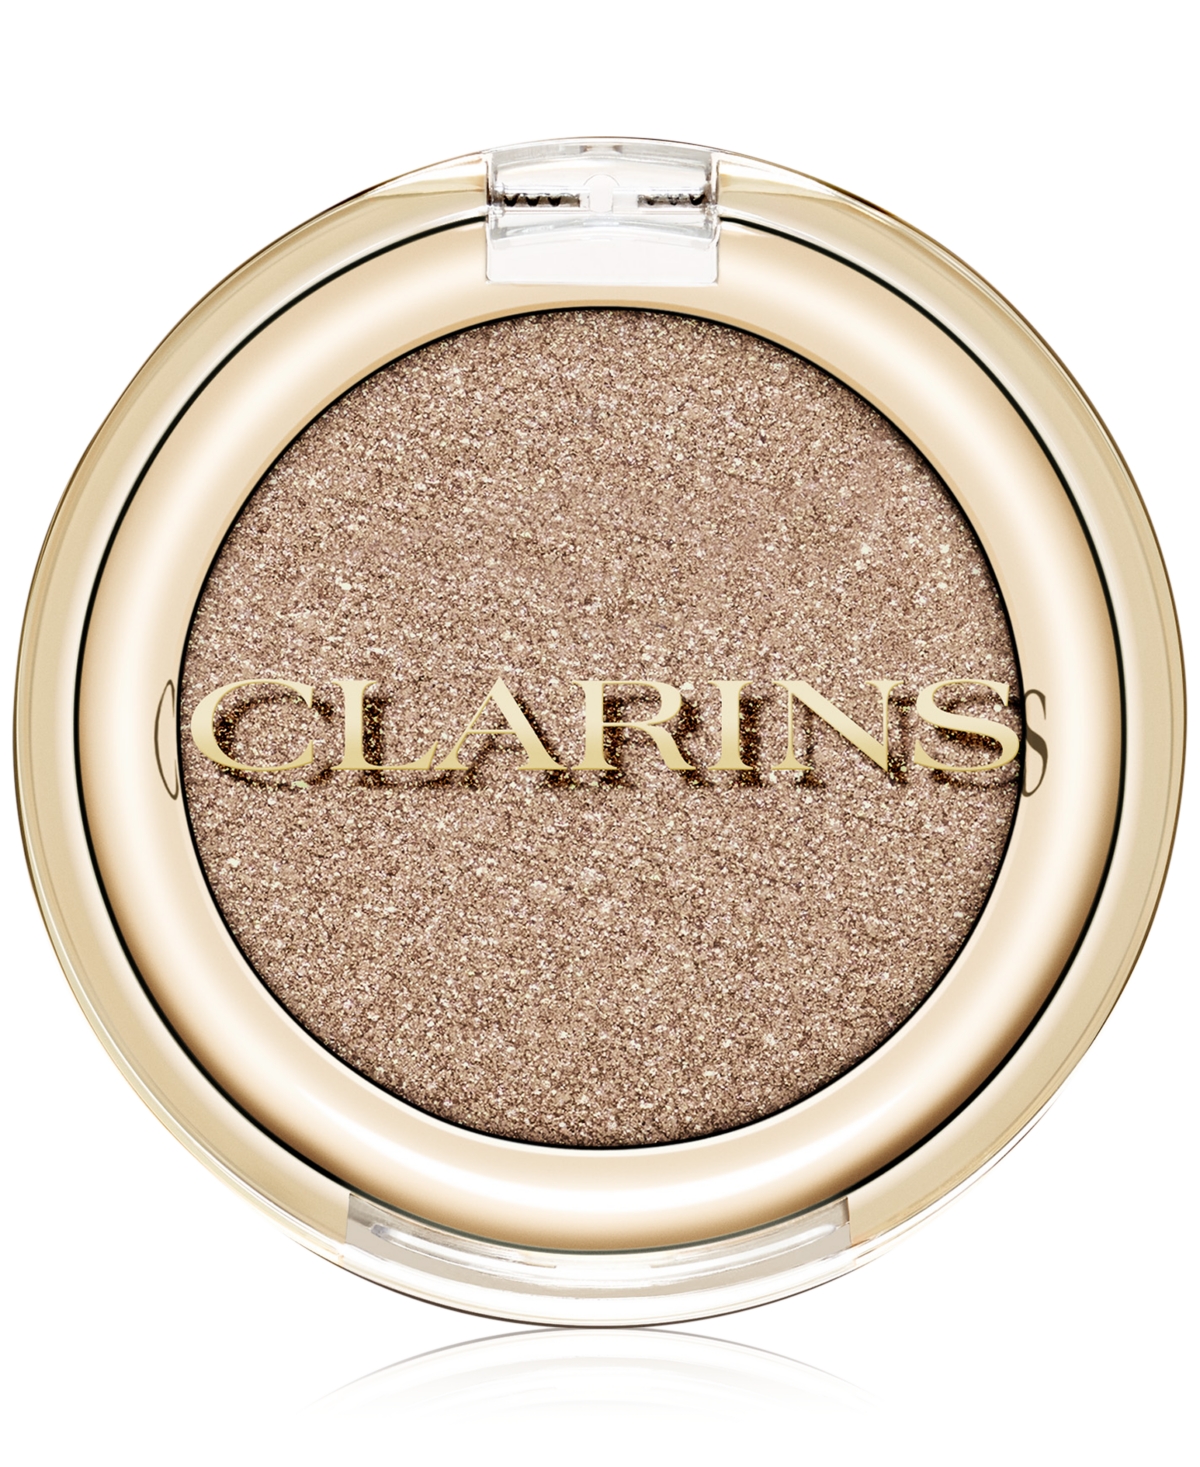 Clarins Ombre Skin Highly Pigmented & Crease-proof Eyeshadow In Pearly Gold